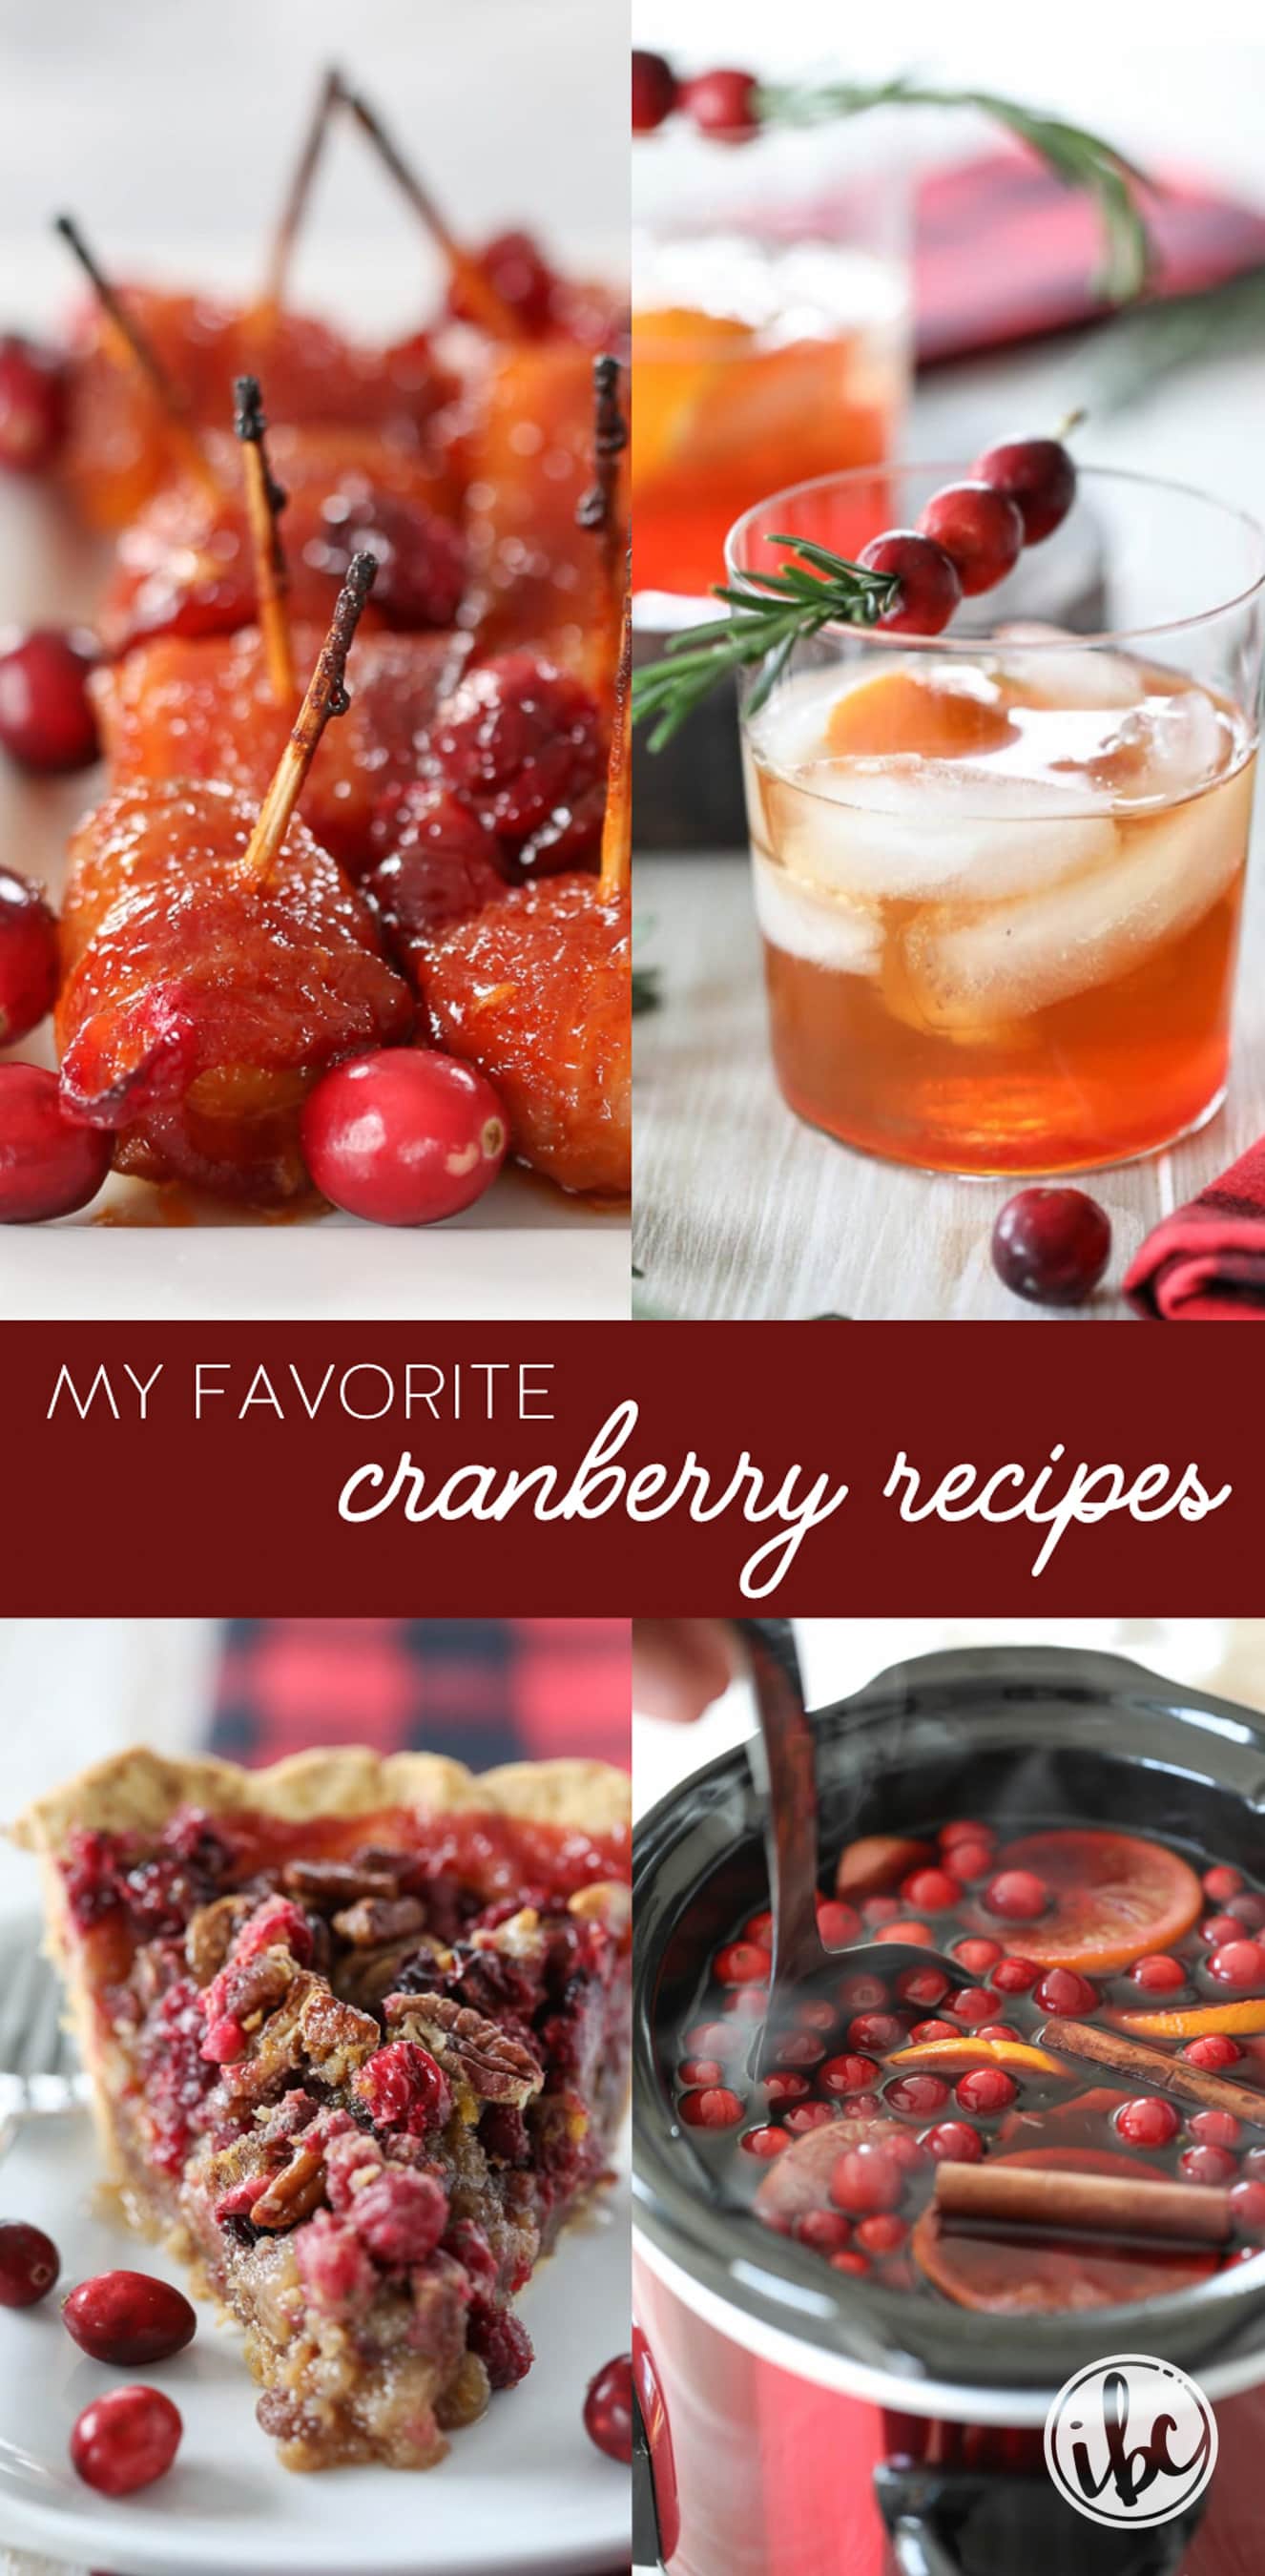 A collection of my favorite Cranberry Recipes perfect for the holiday season! #cranberry #recipes #thanksgiving #christmas #dessert #cocktail #holdiay #baking #appetizers